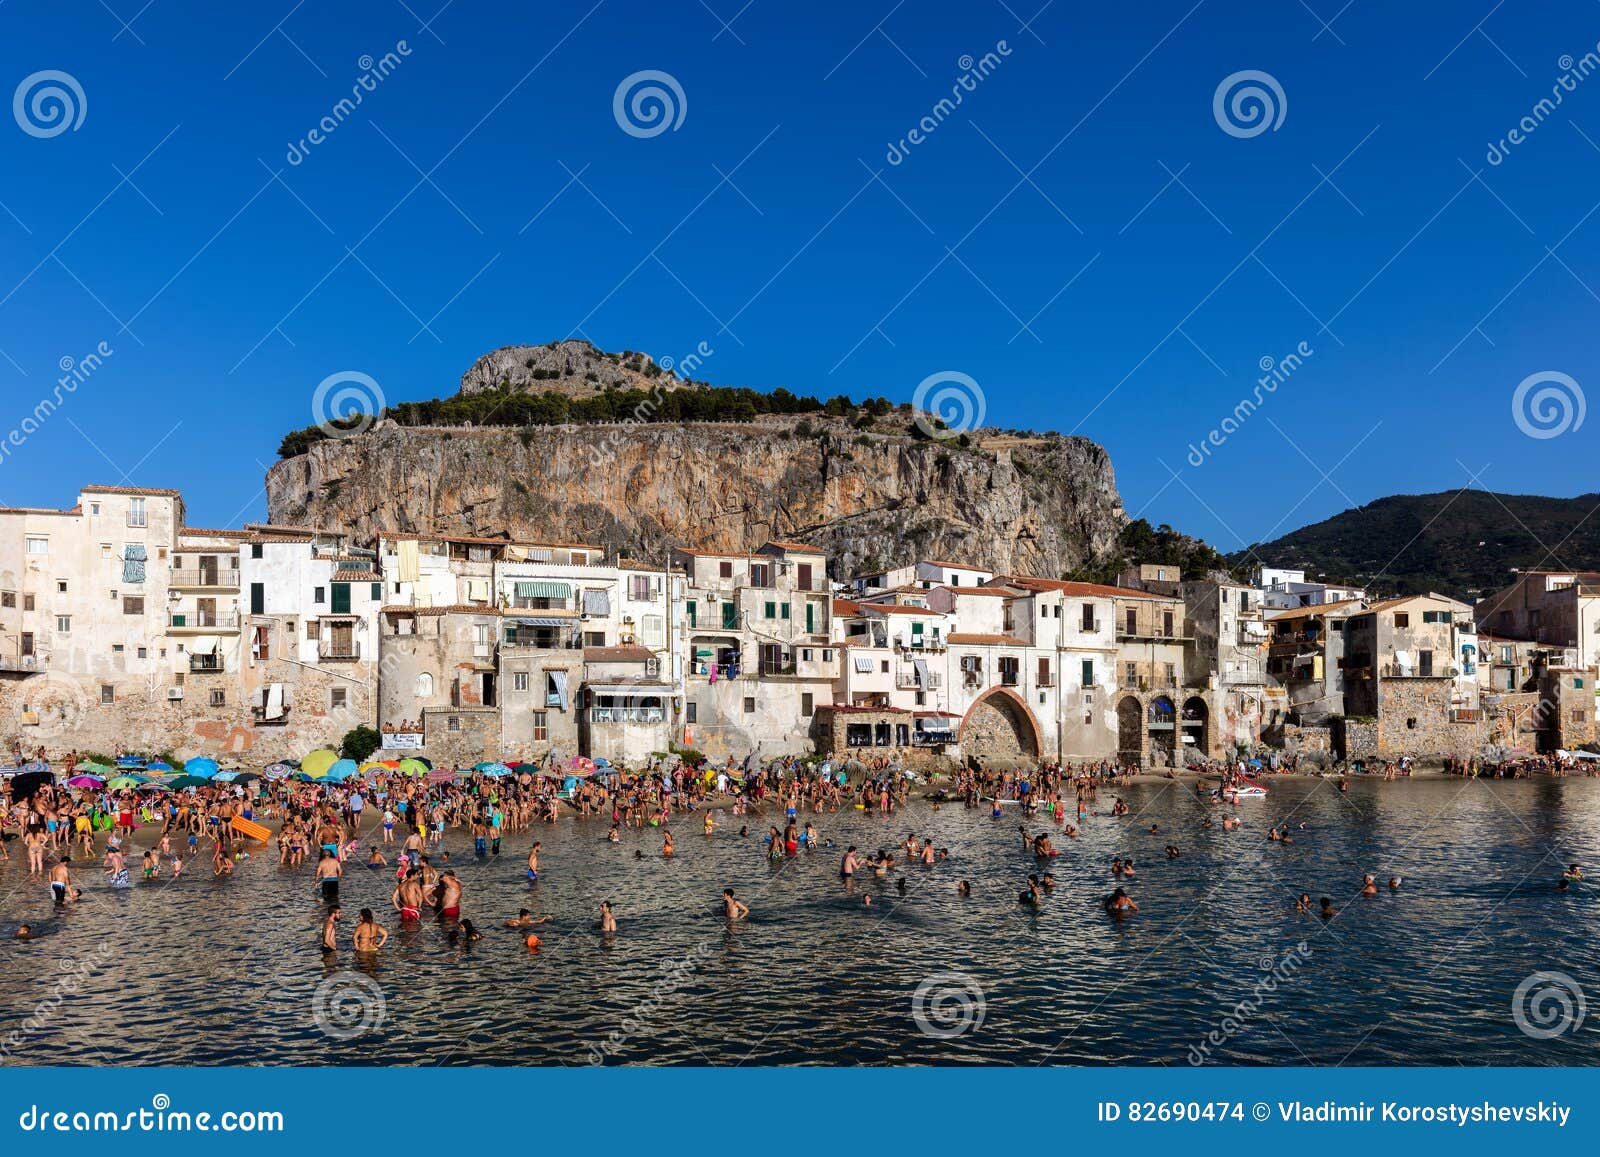 Cefalu`s Beach in Sicily, Italy Editorial Stock Image of cefalu, summer: 82690474